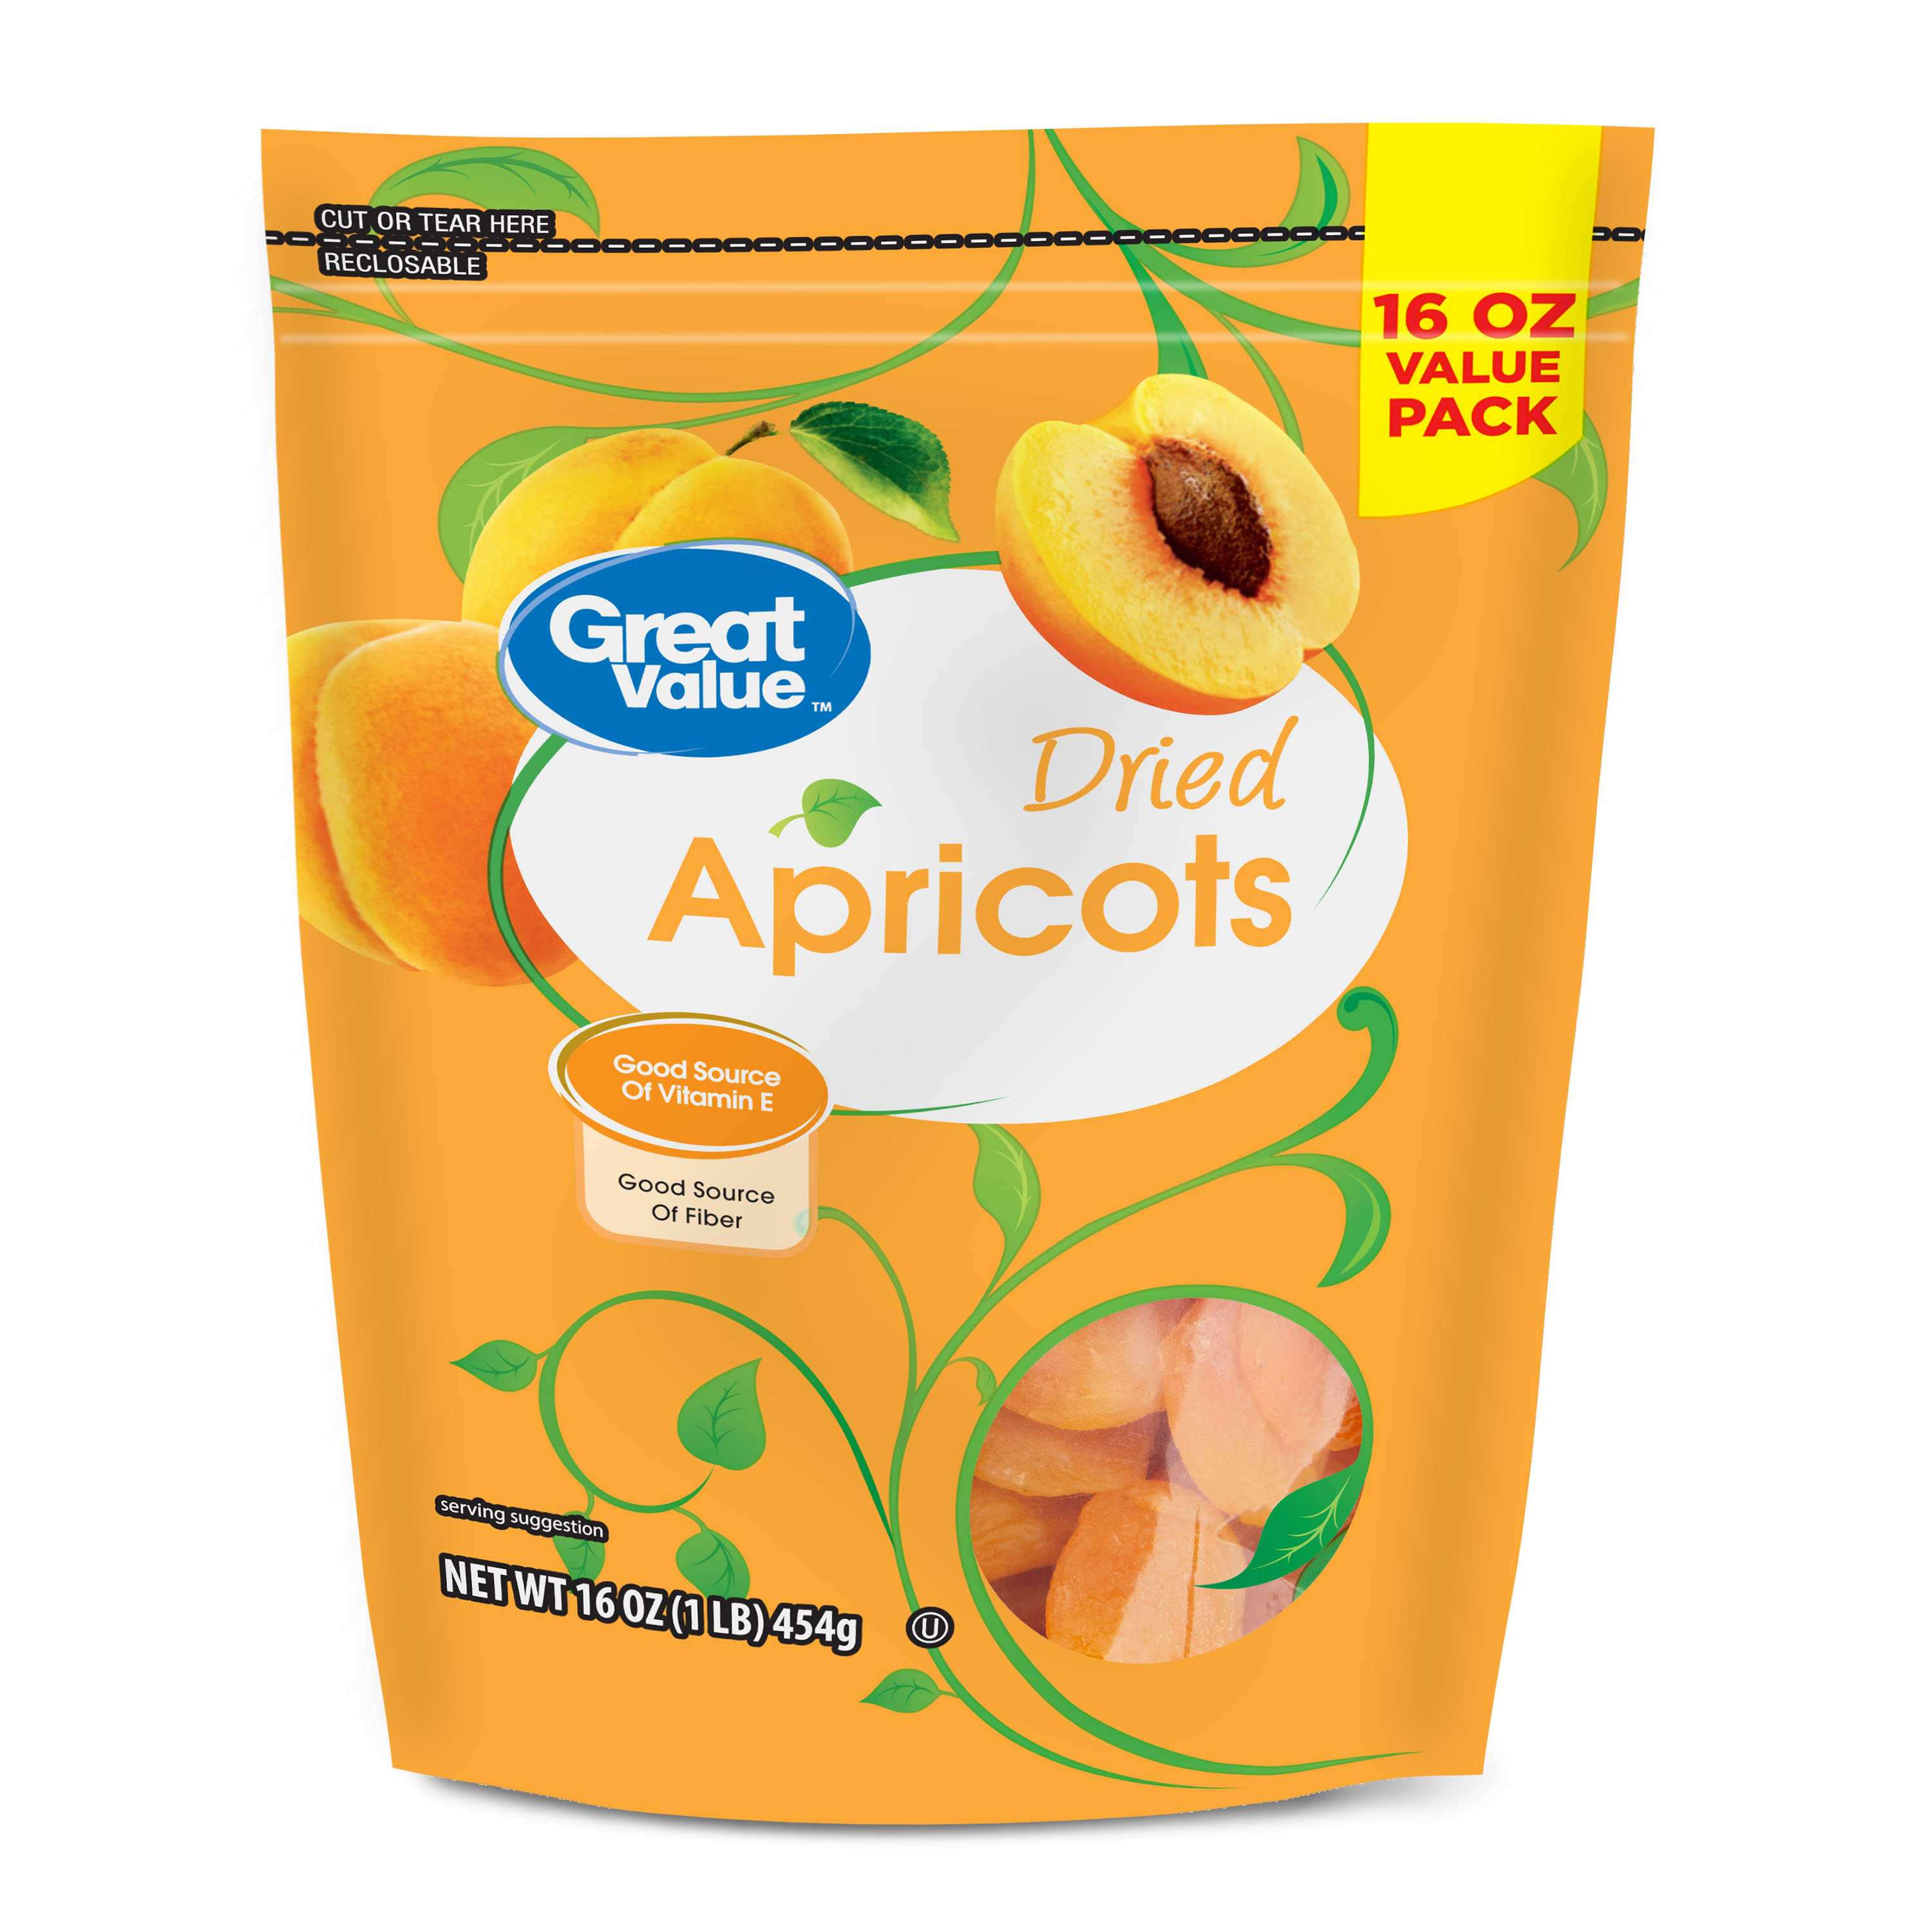 Great Value Dried Apricots, 16 oz - image 1 of 7